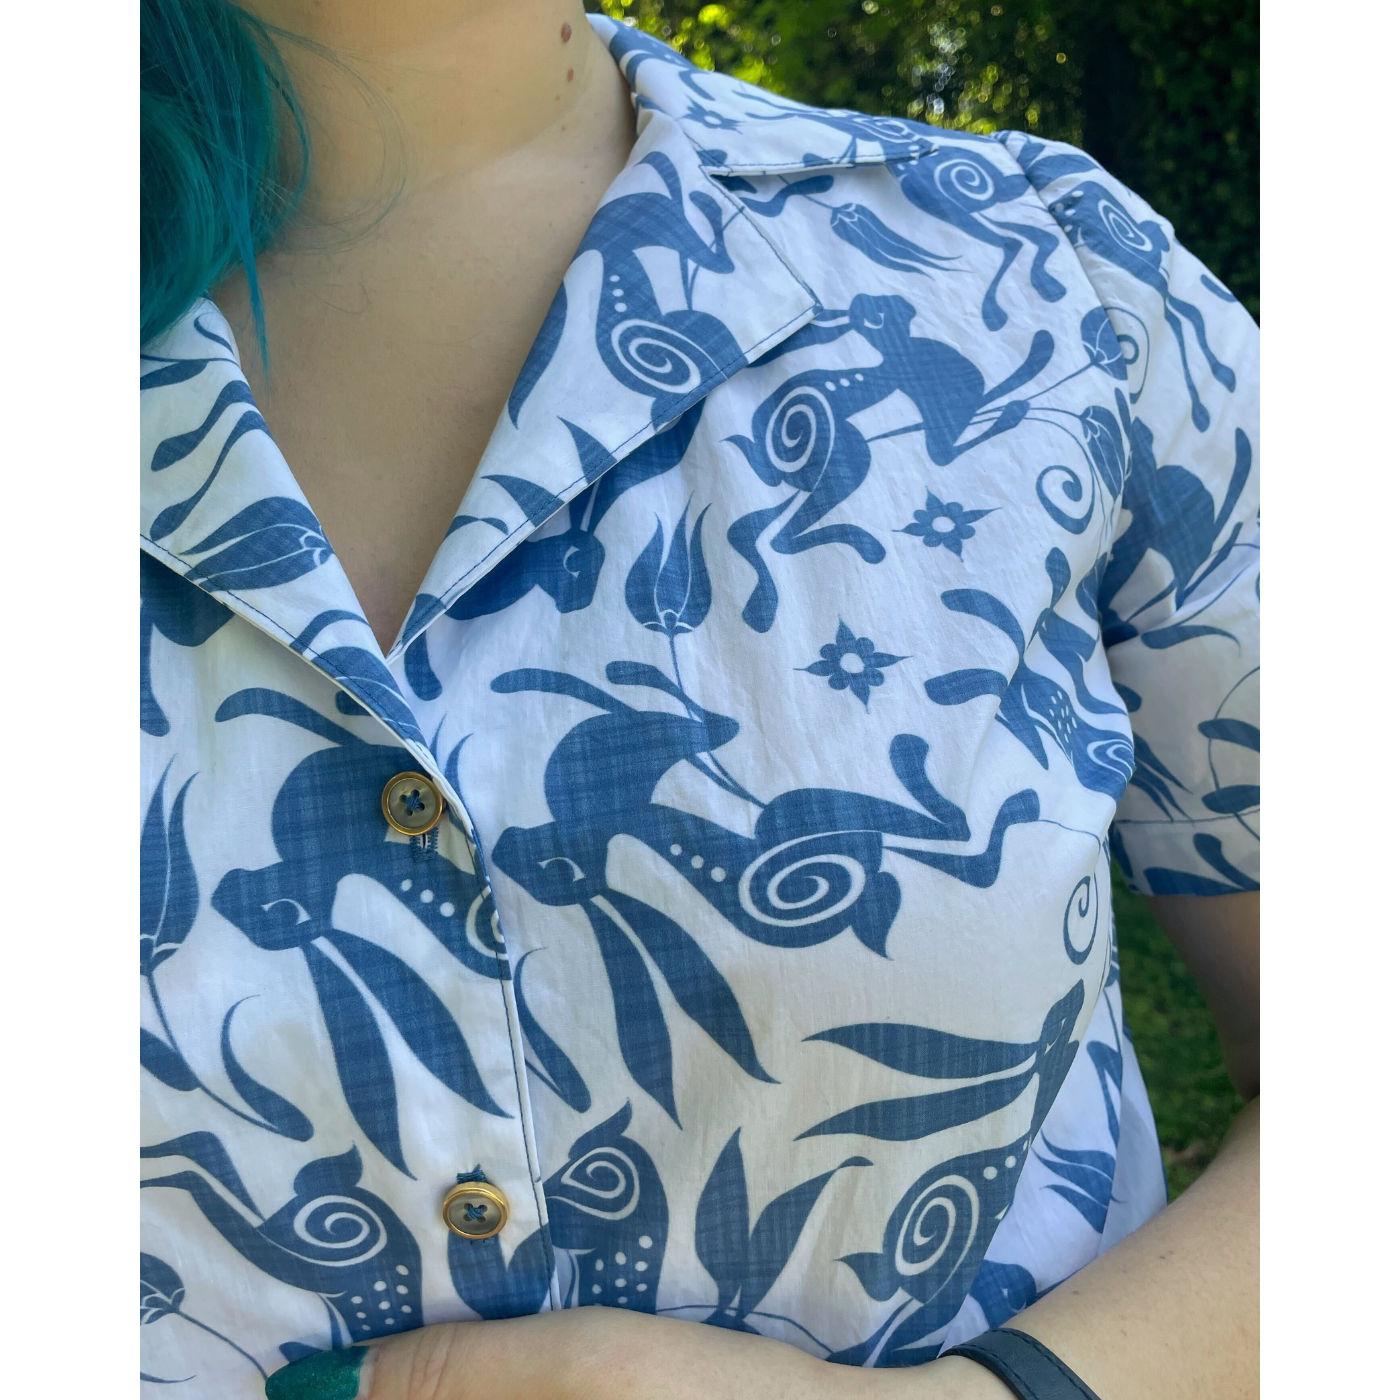 A close up of the top of a white short-sleeve shirt with buttons up the front featuring a design with blue bunnies and blue tulips floating through it.